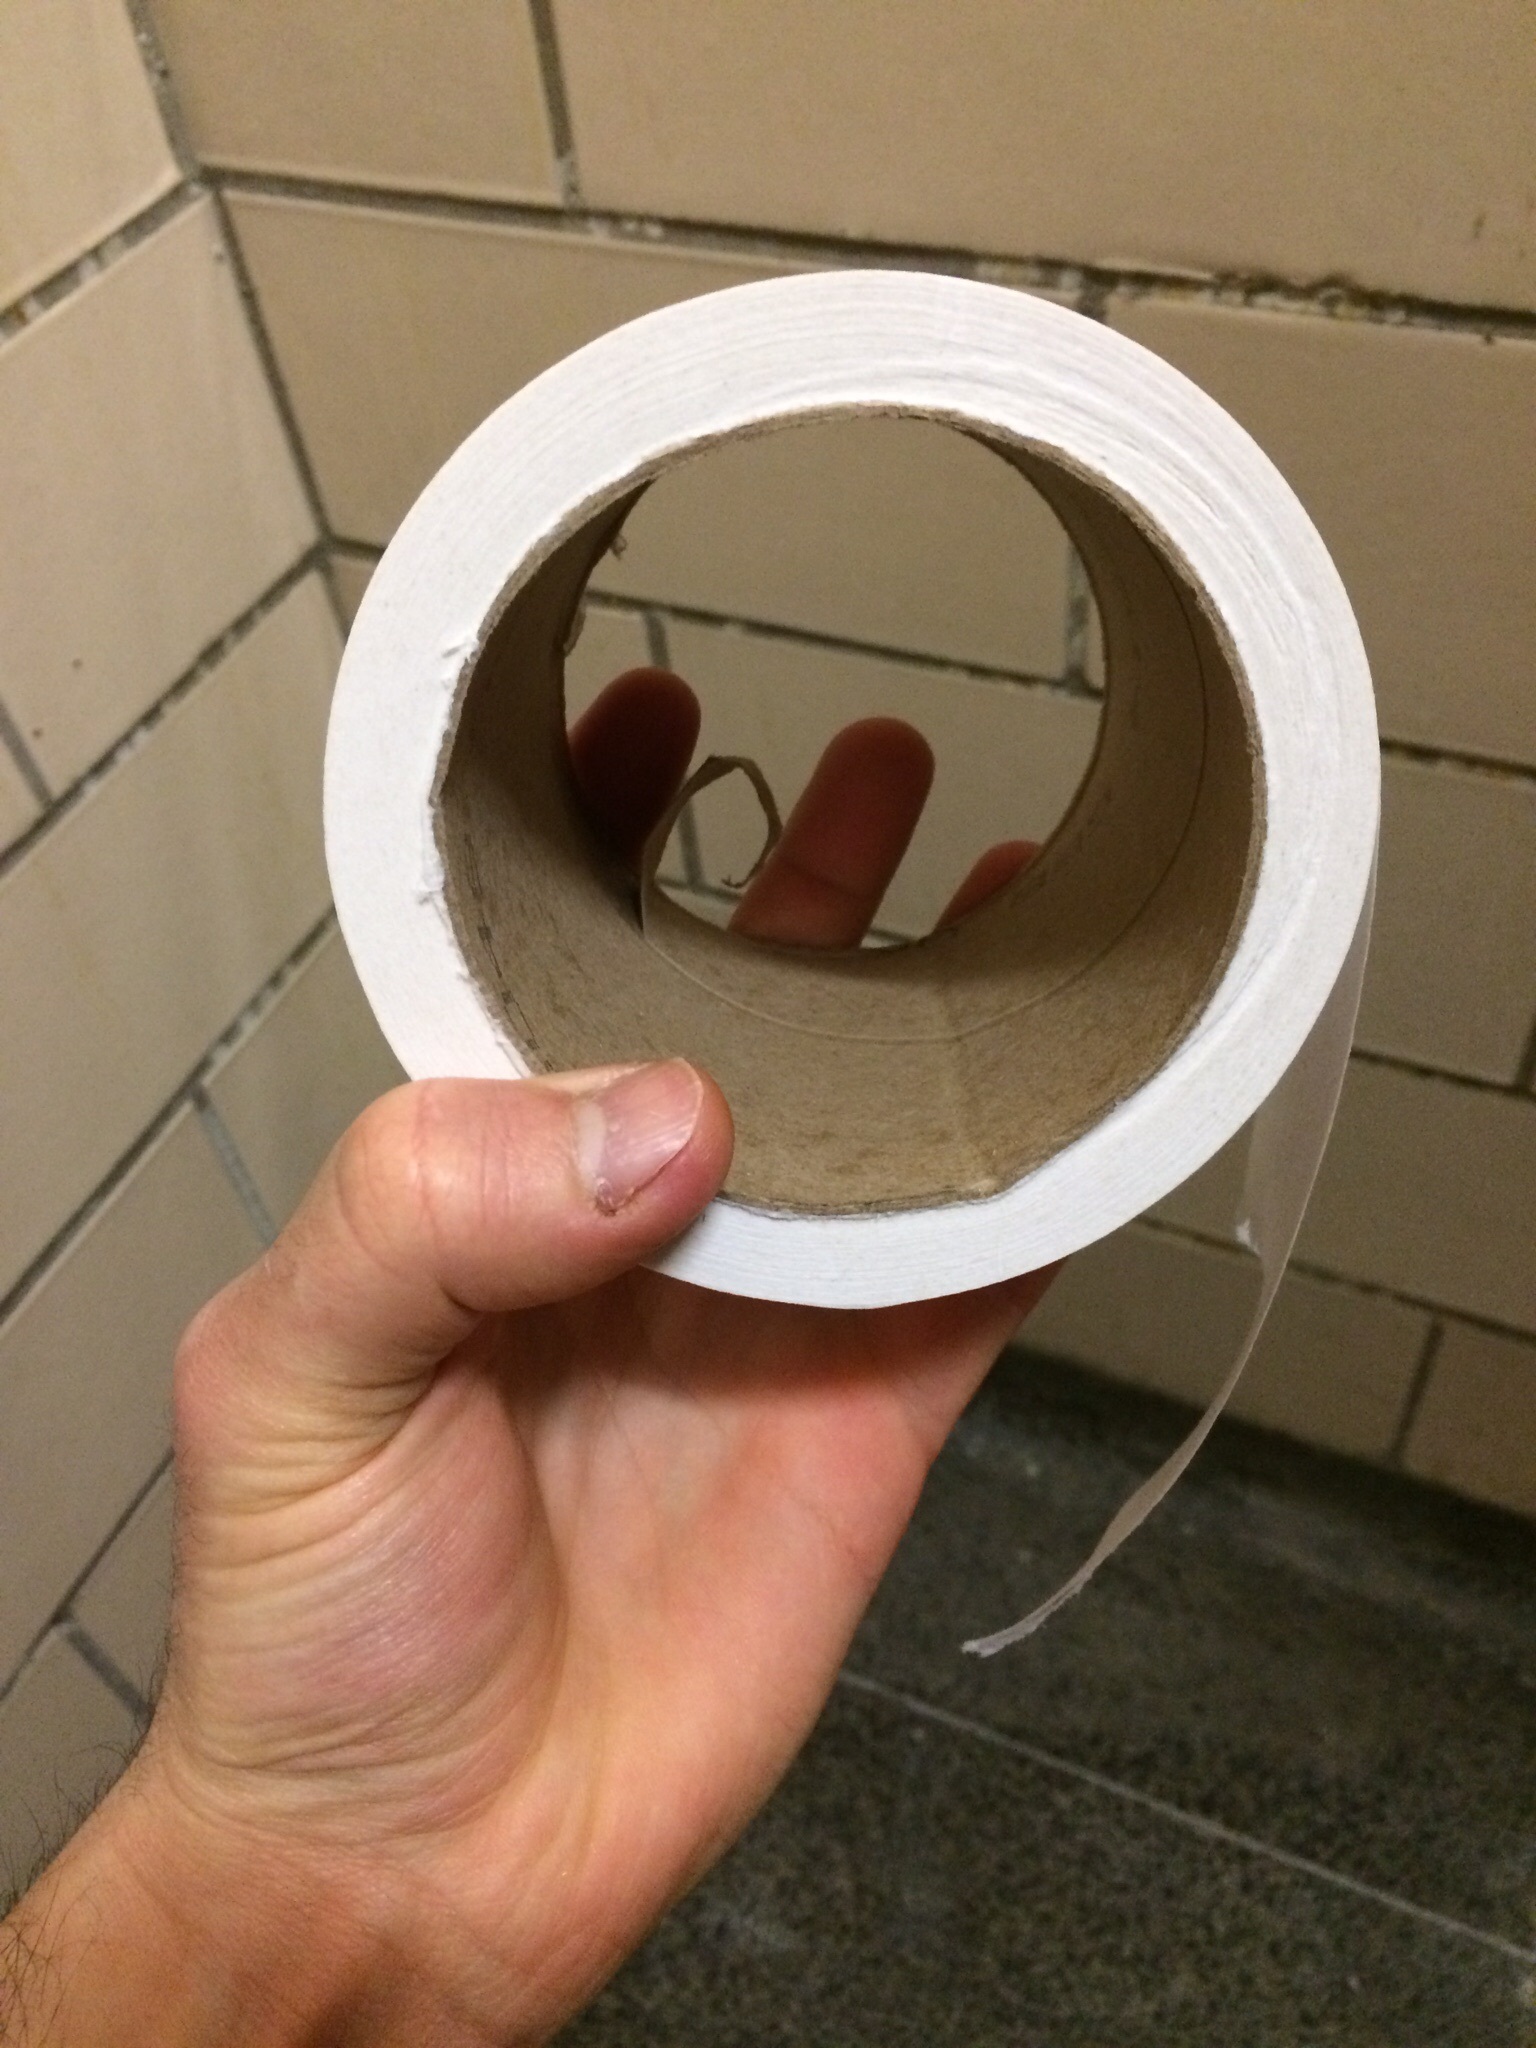 Toilet Roll Dick Test